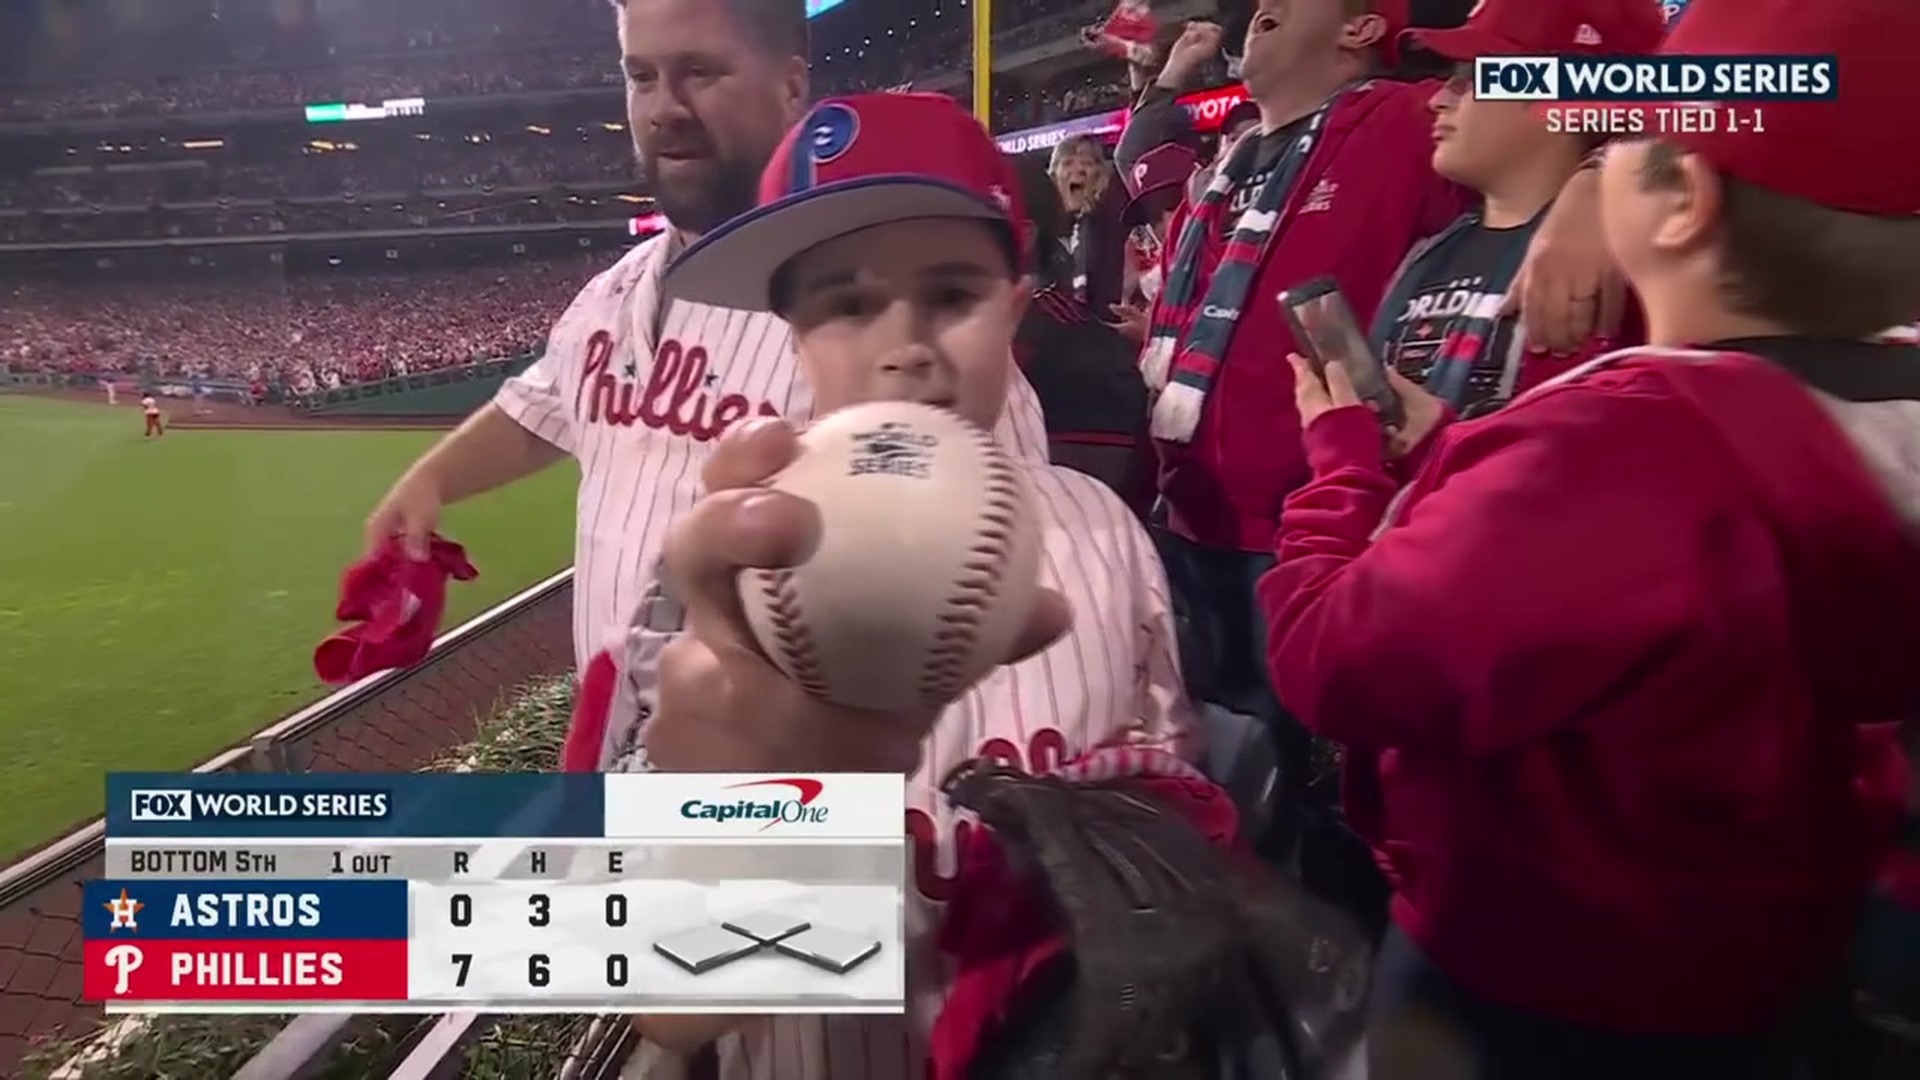 Twelve-year-old Serock Gavin caught the home run ball hit by Phillies Rhys Hoskins in game three of the World Series.